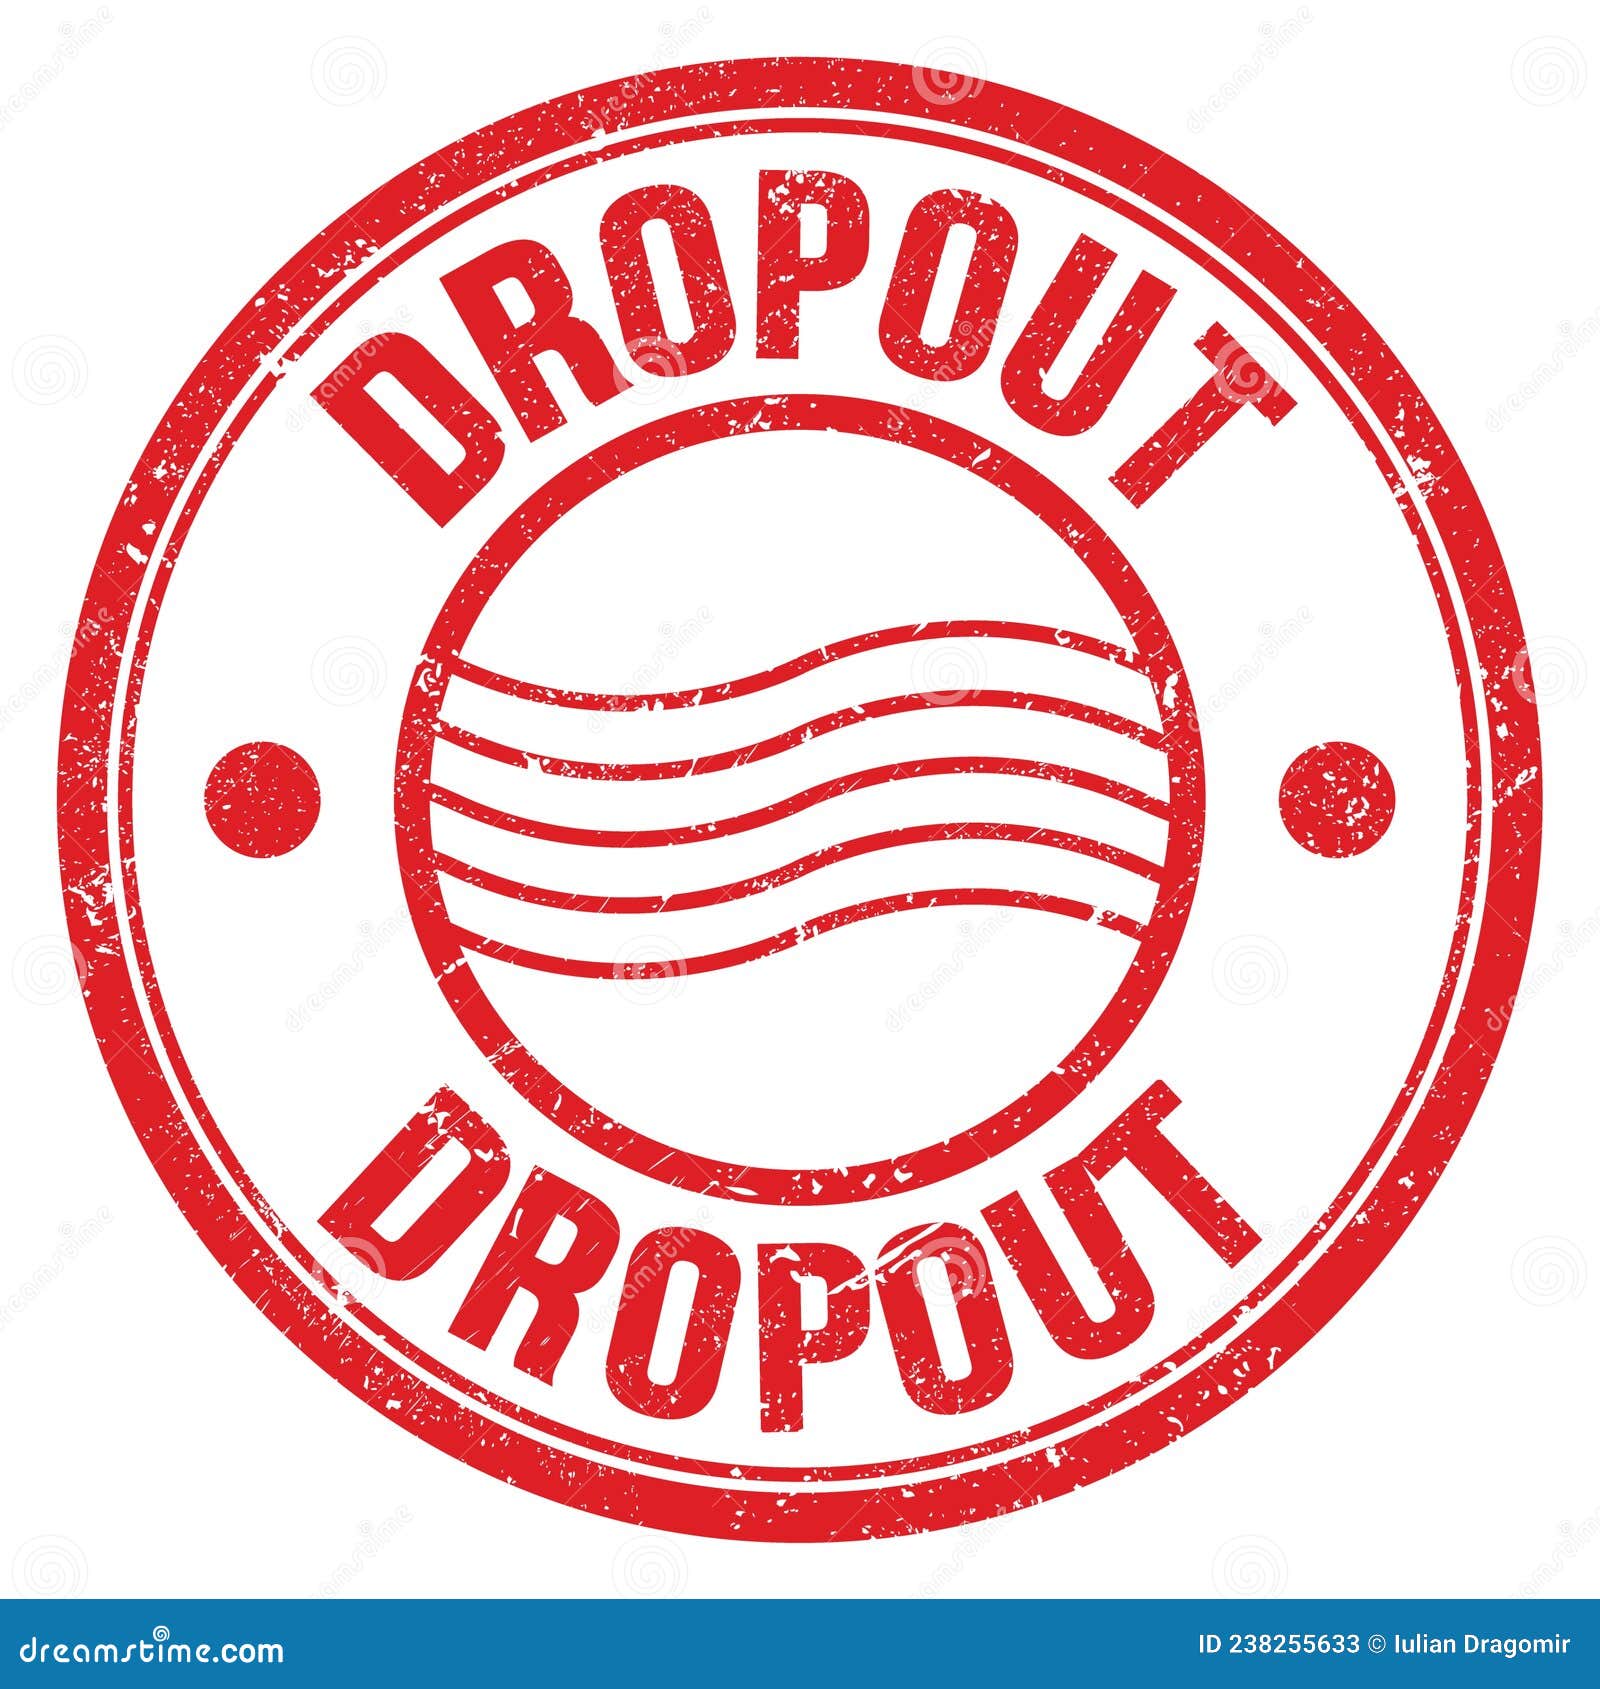 dropout text written on red round postal stamp sign